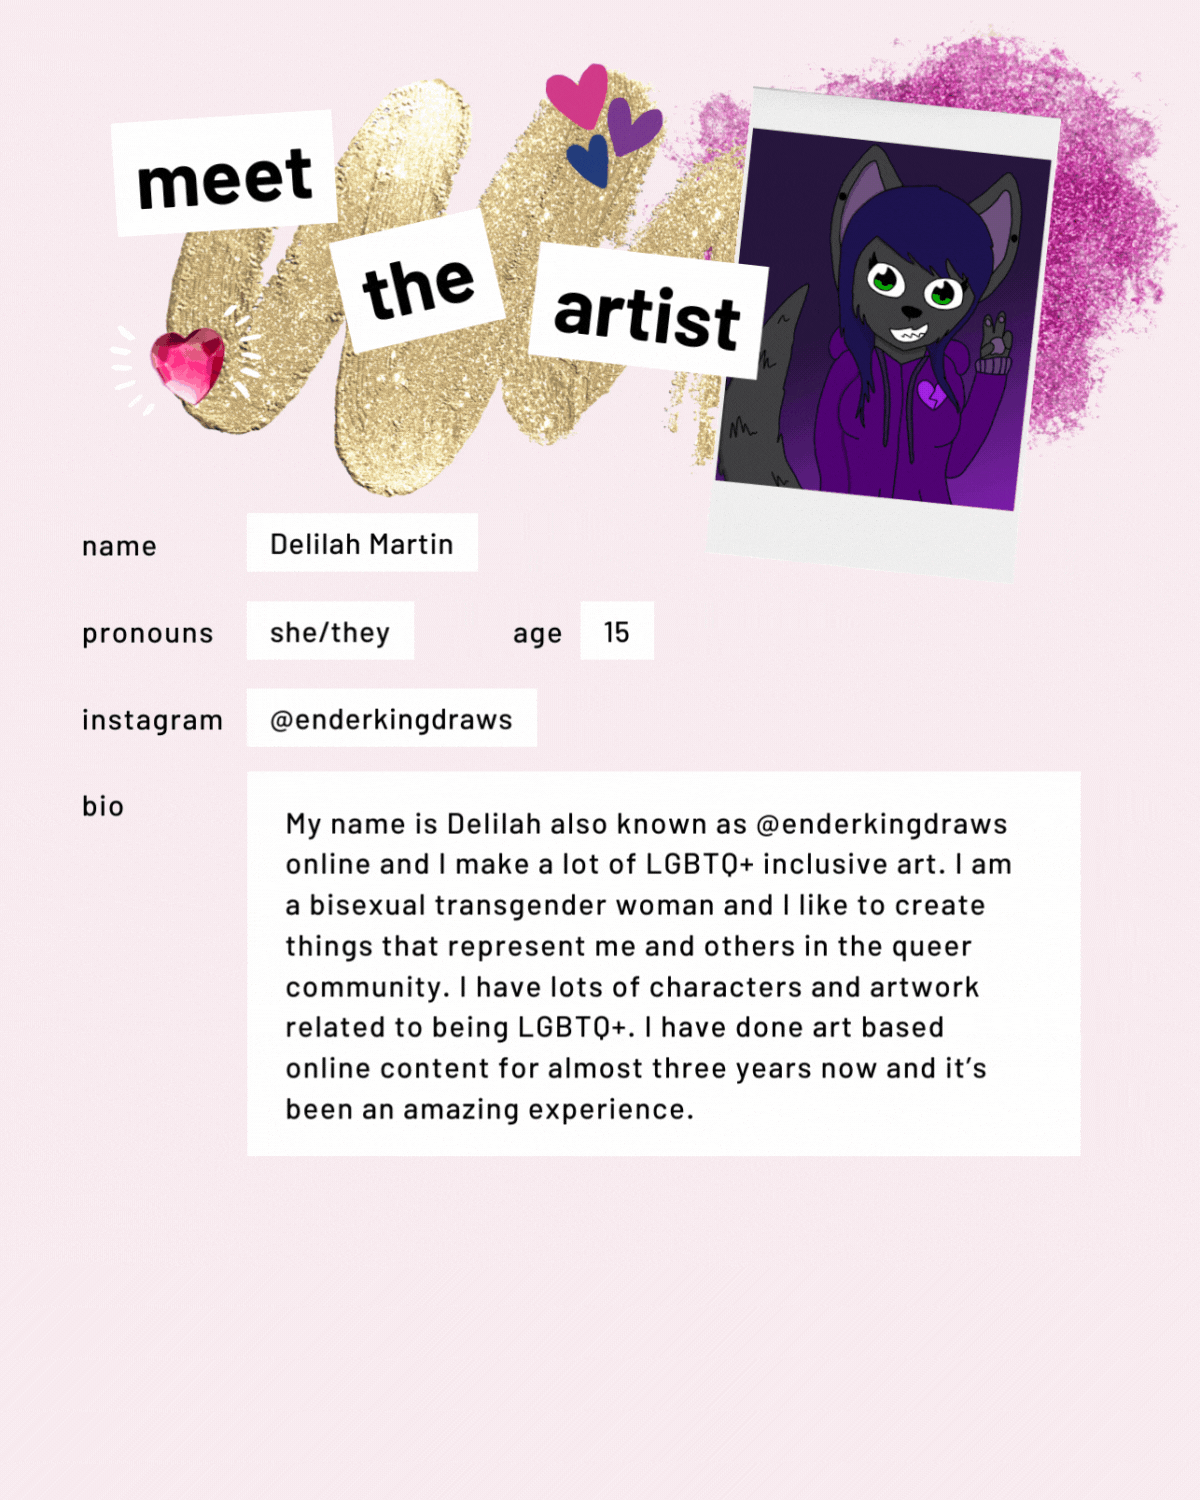 Meet the artist page with drawing of a cat-humanoid-creature. Name: Delilah Martin. Pronouns: she/they. Age: 15. Instagram:@enderkingdraws. My name is Delilah also known as @enderkingdraws online and I make a lot of LGBTQ+ inclusive art. I am a bisexual transgender woman and I like to create things that represent me and others in the queer community. I have lots of characters and artwork related to being LGBTQ+. I have done art based online content for almost three years now and it’s been an amazing experience.